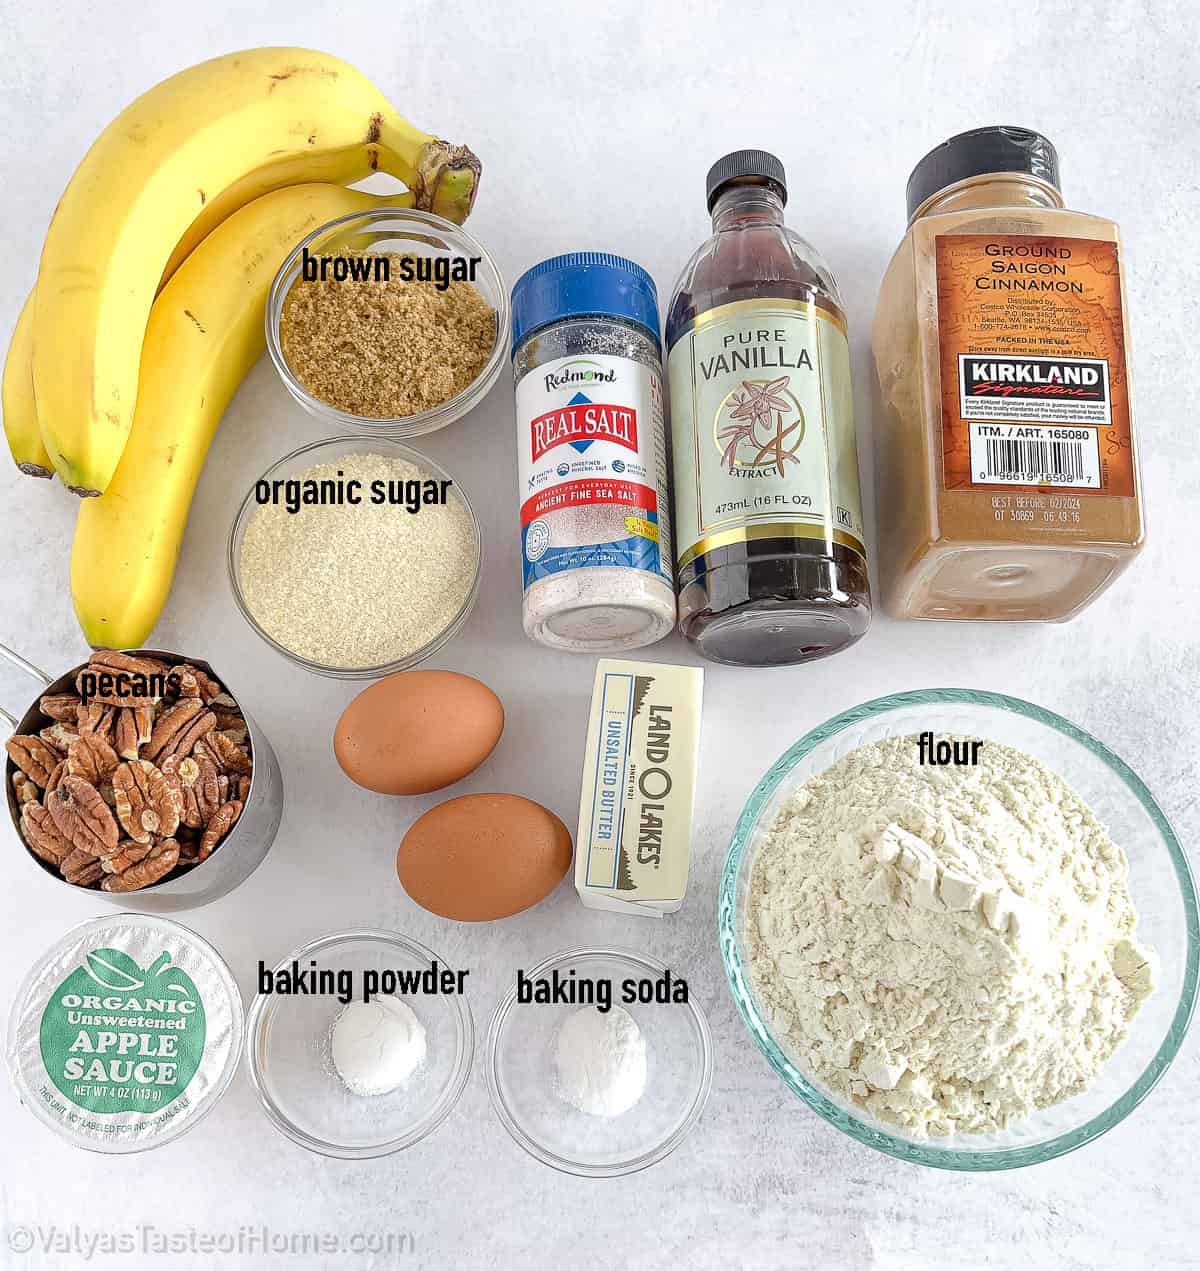 All you need are some incredibly simple ingredients to make the tastiest banana pecan bread you've ever had!